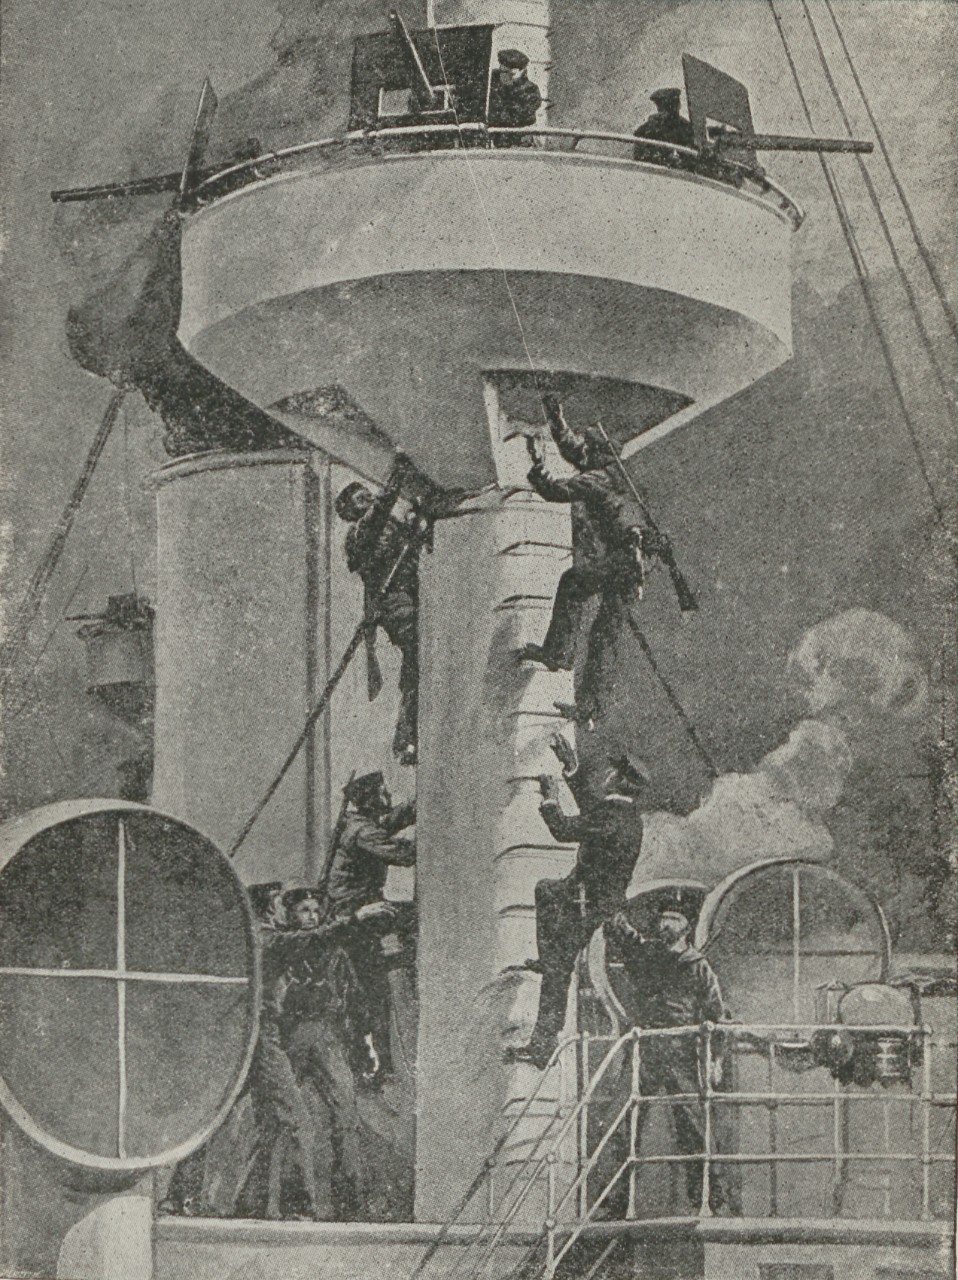 An artist's rendition of the fighting top on a mast during action.